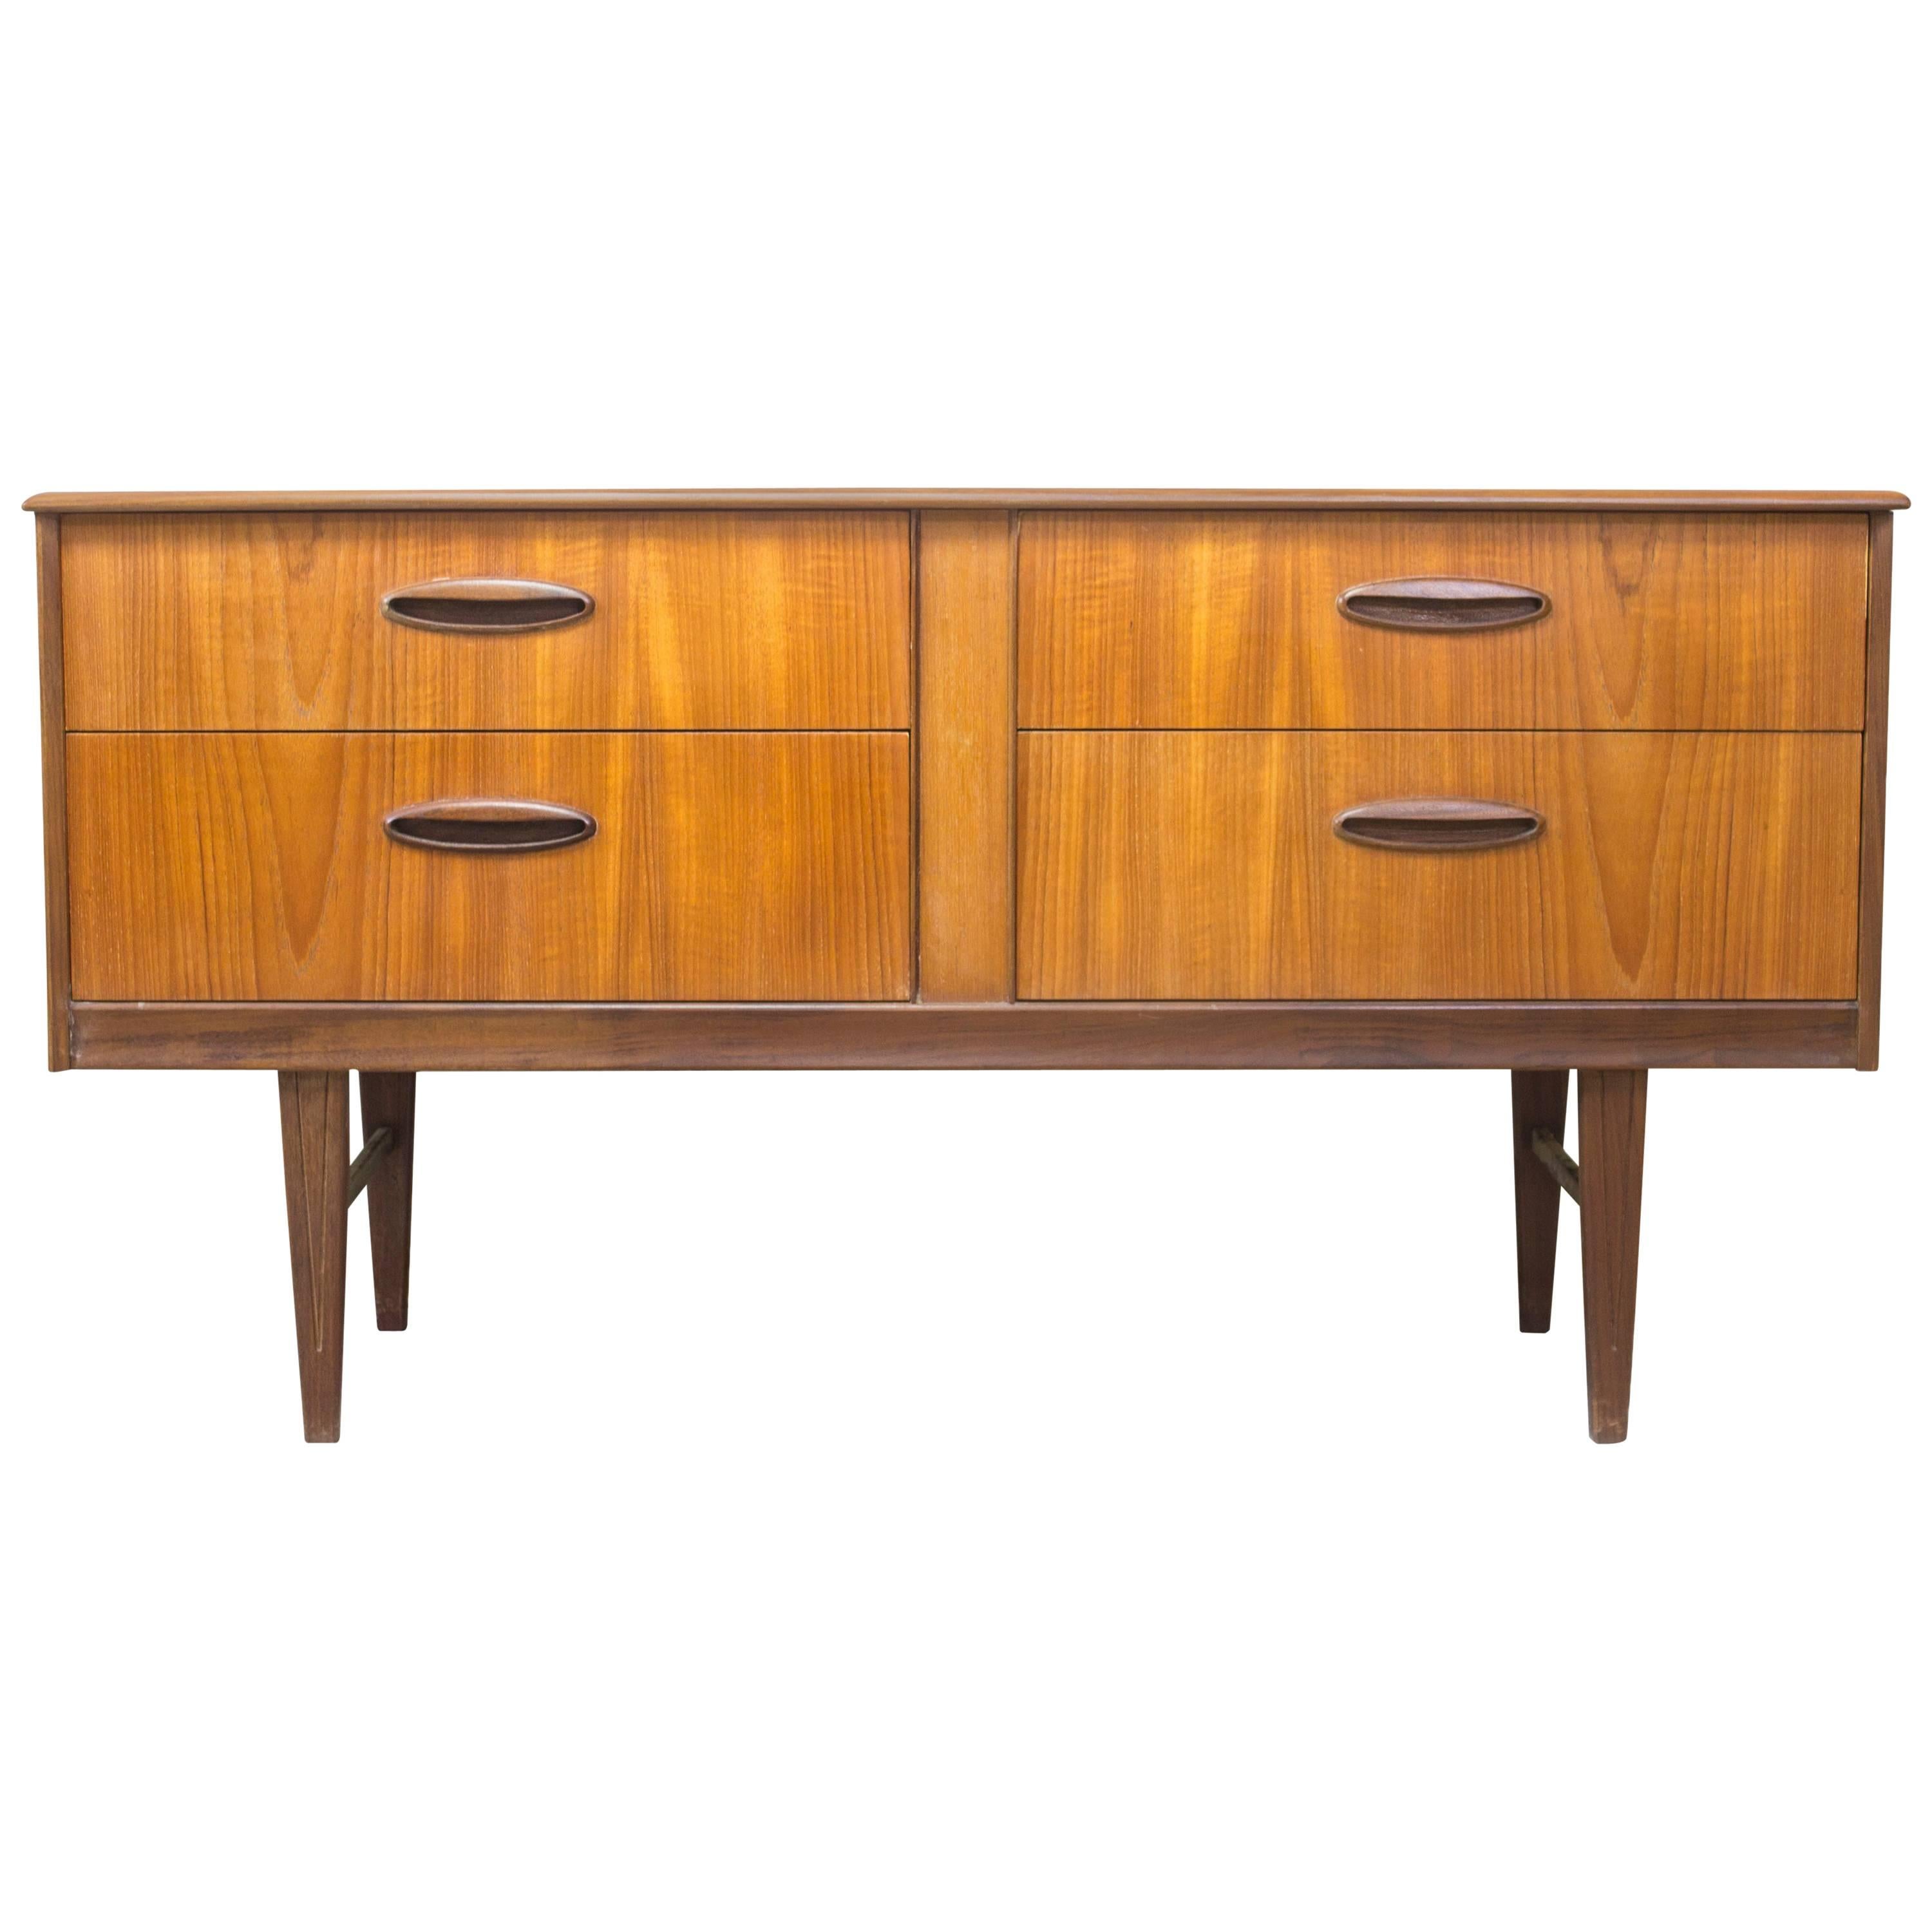 Danish Style Compact Sideboard Storage Unit For Sale